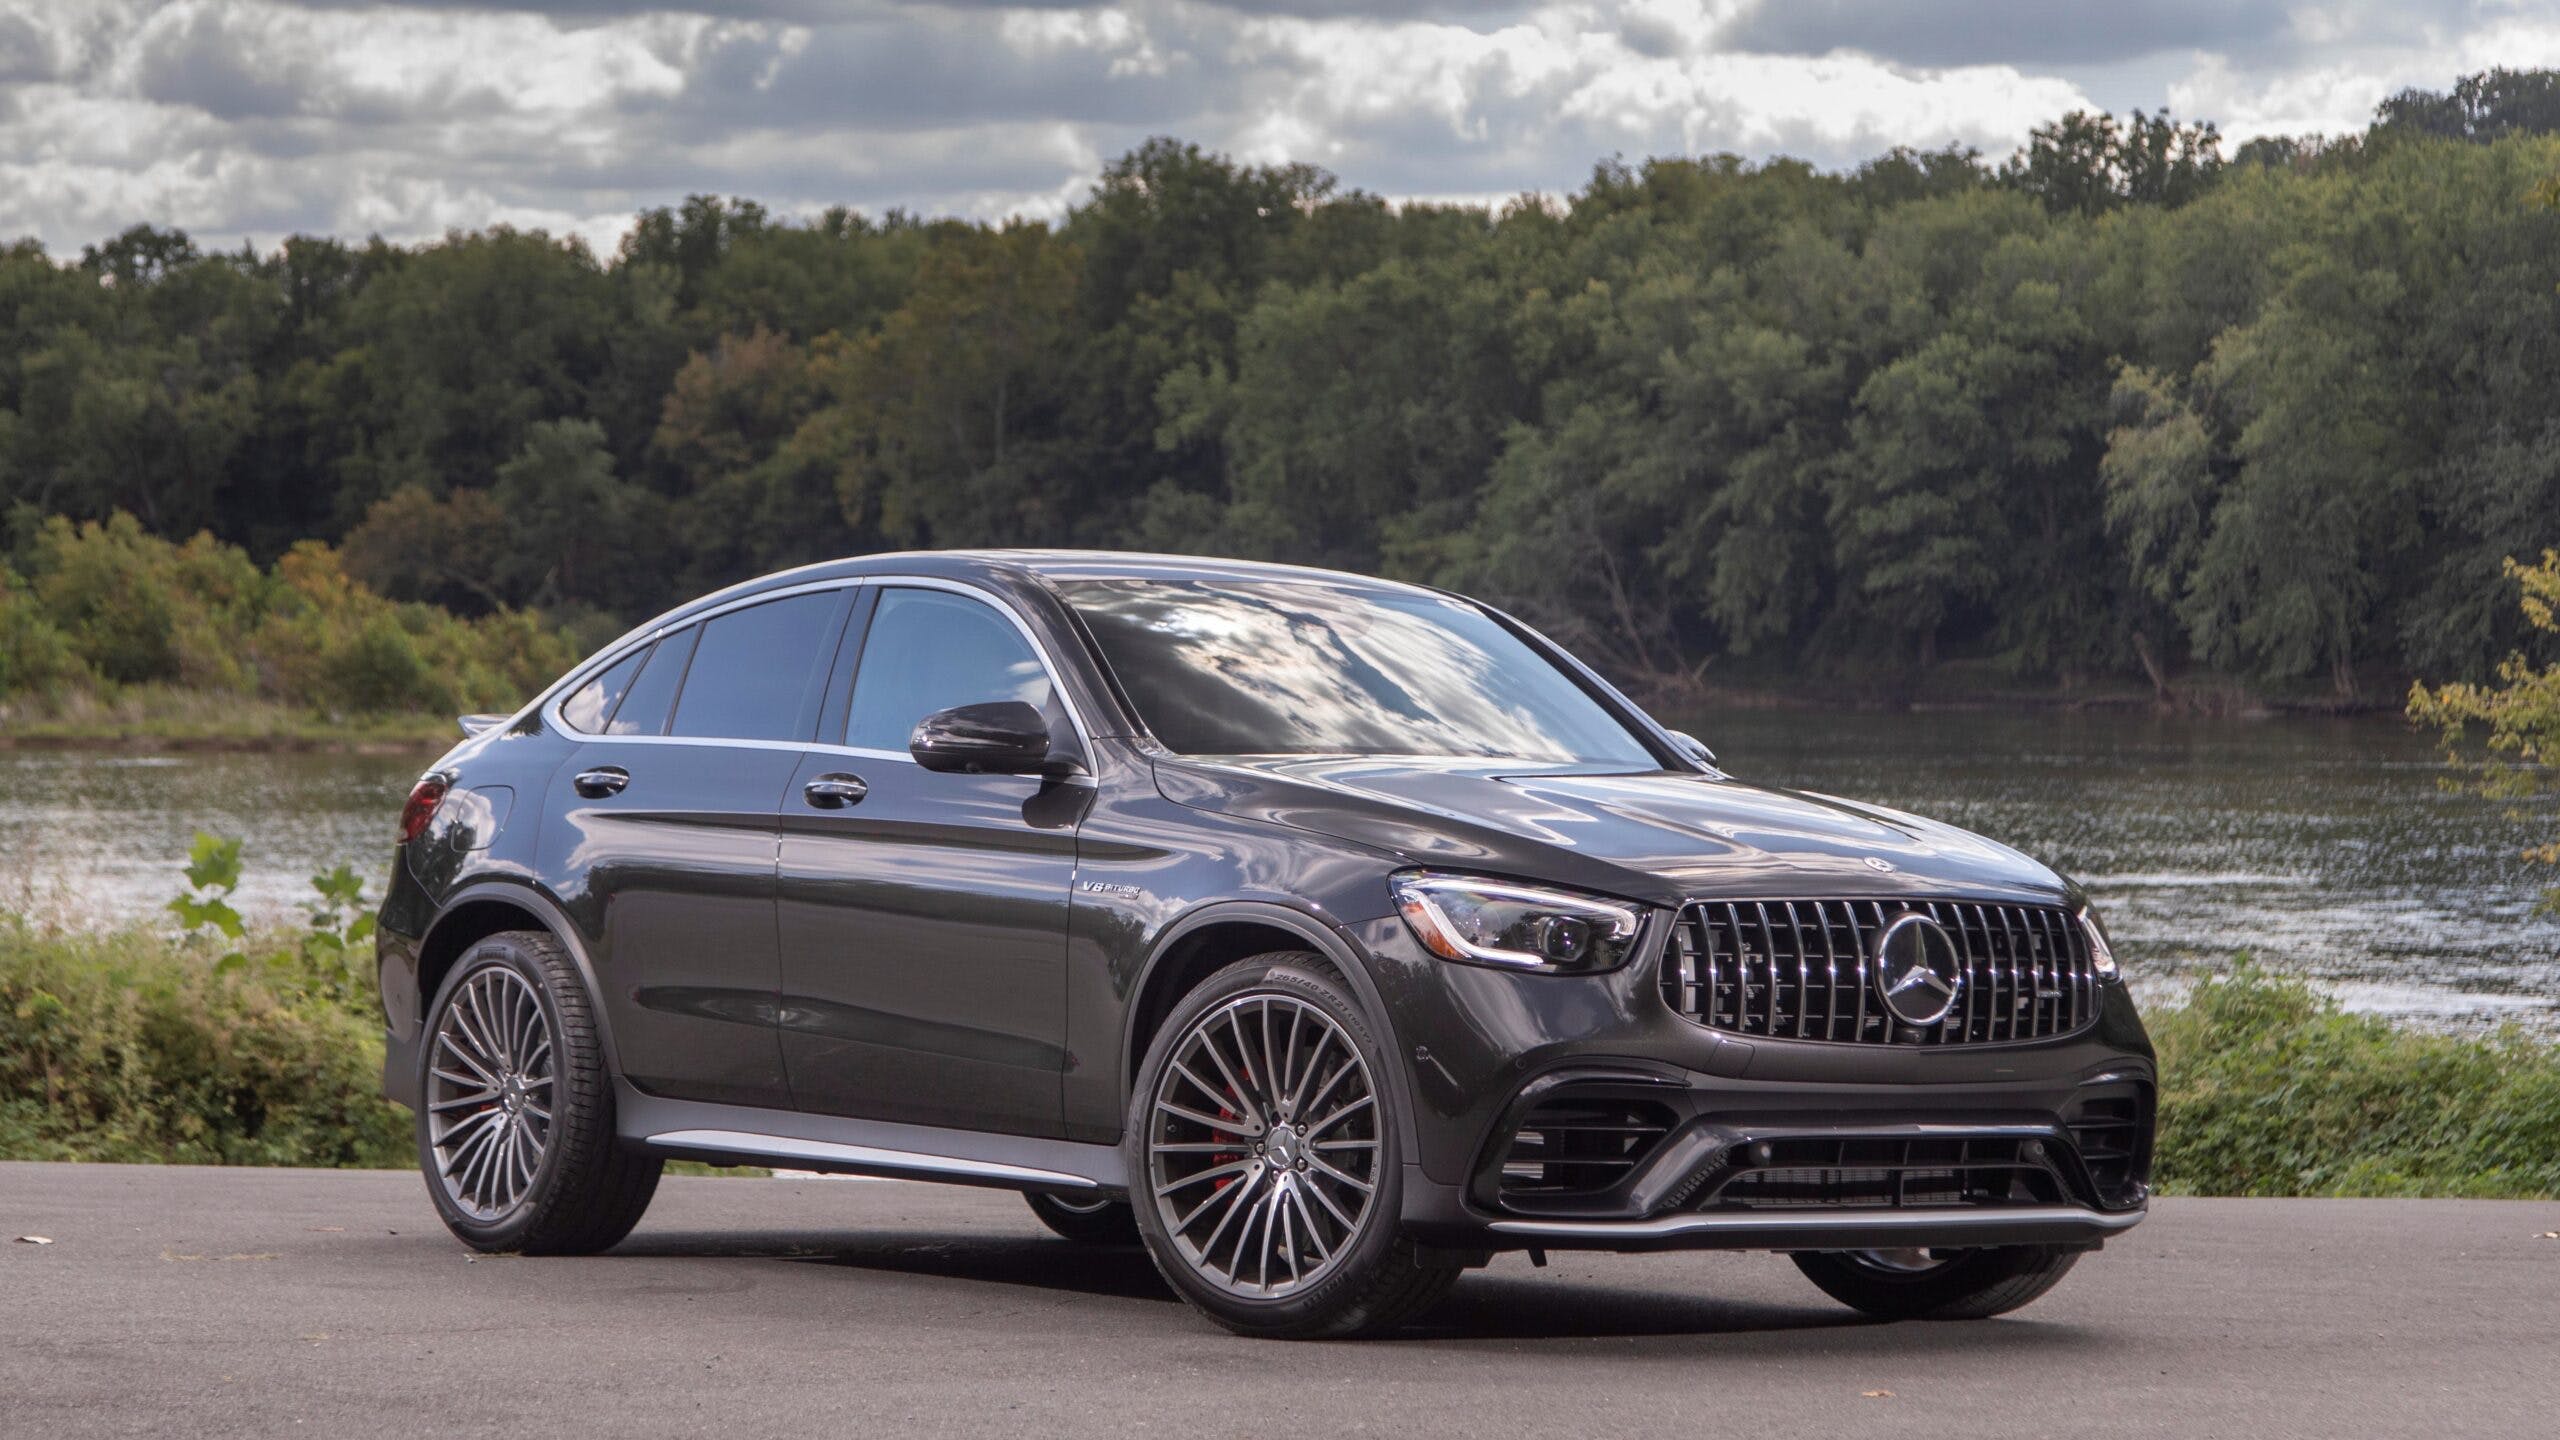 Test Drive: 2020 Mercedes-AMG GLC 63 S Coupe Review - CARFAX